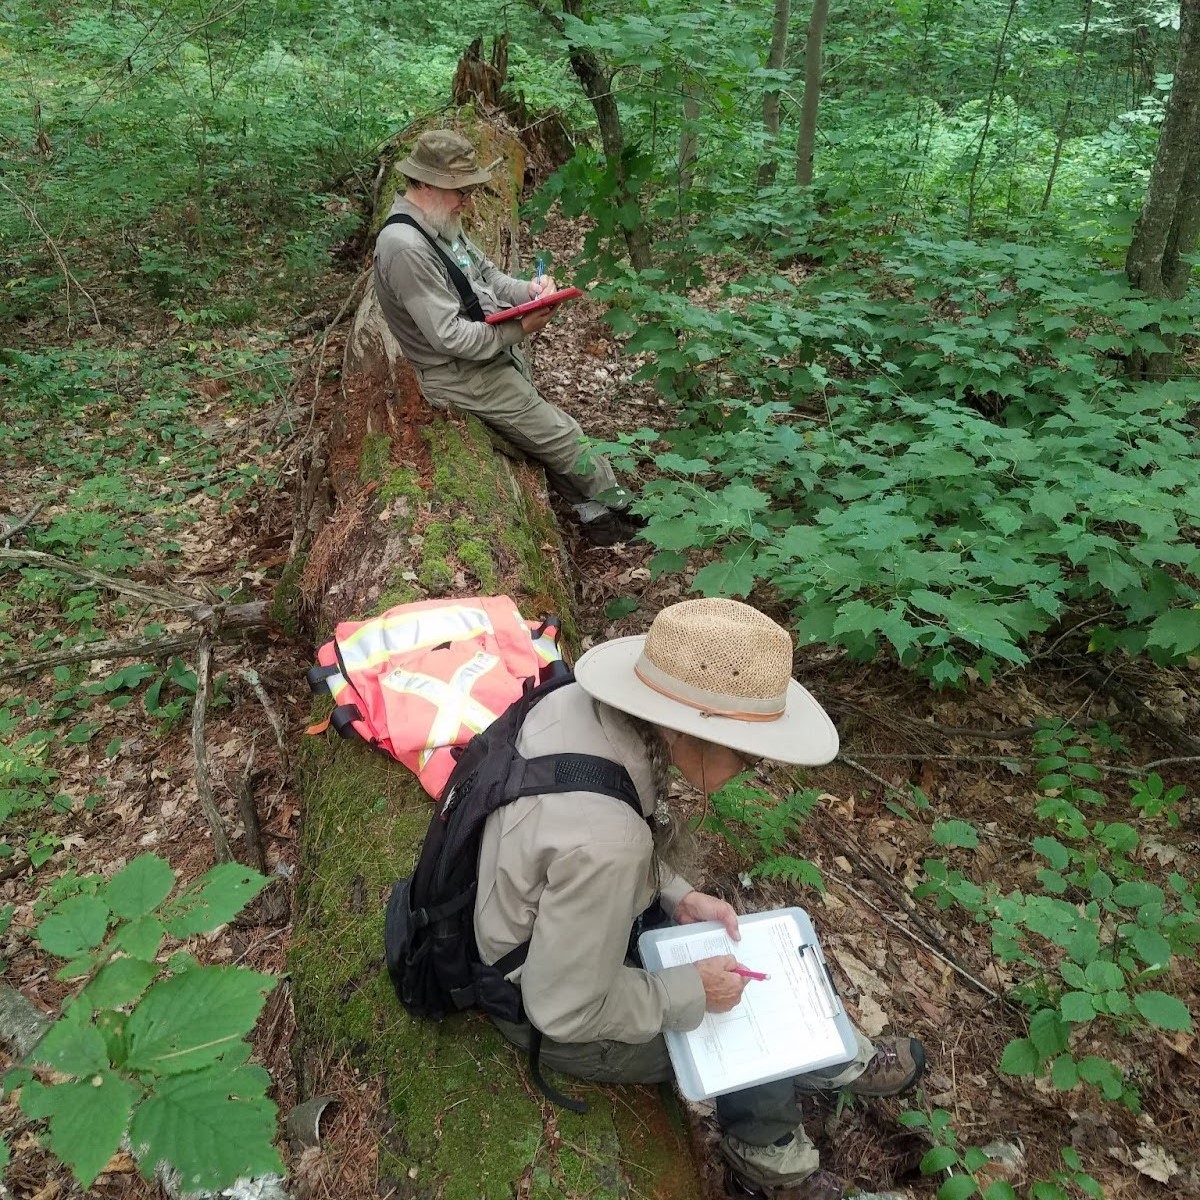 Two researchers sitting on a fallen tree in the woods, writing notes.